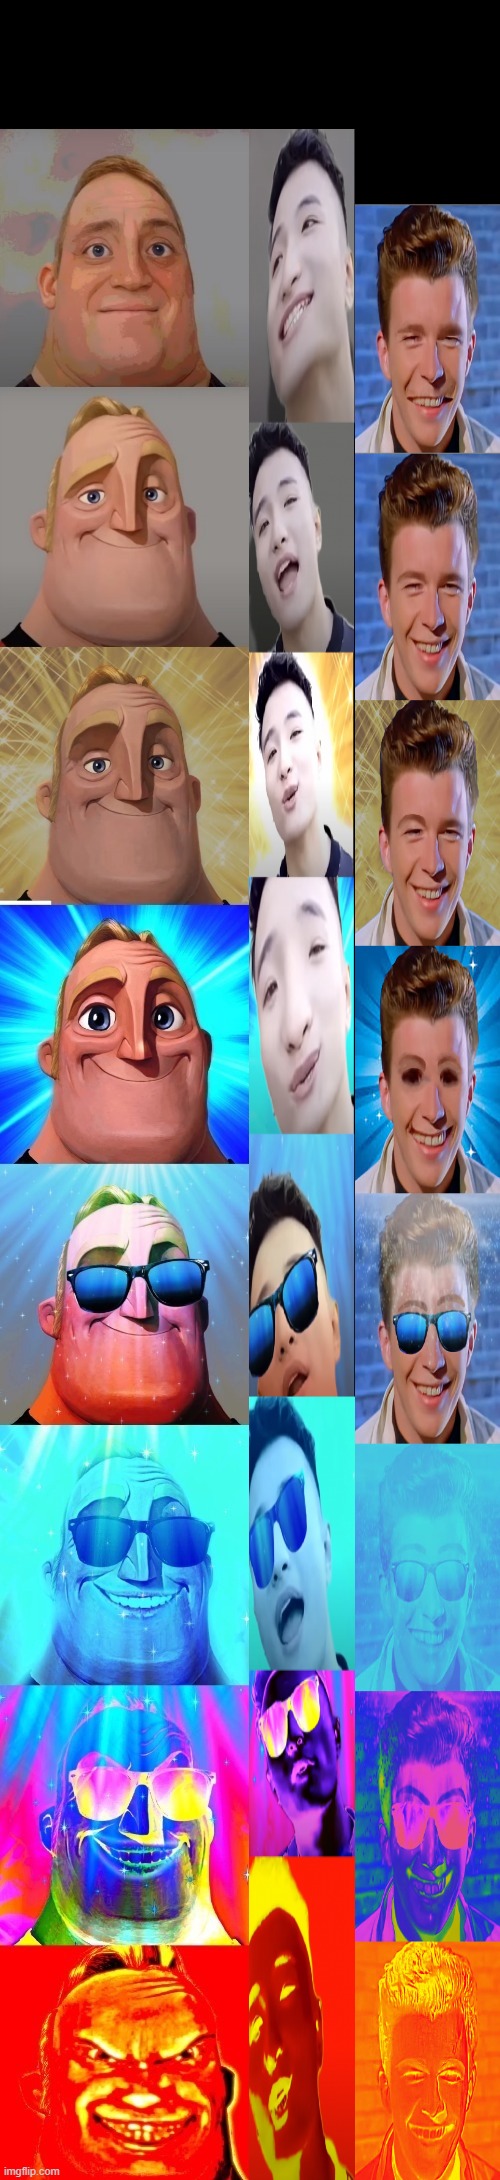 mr incredible,super idol ad rick becoming canny | image tagged in mr incredible becoming canny but have 8 phases | made w/ Imgflip meme maker